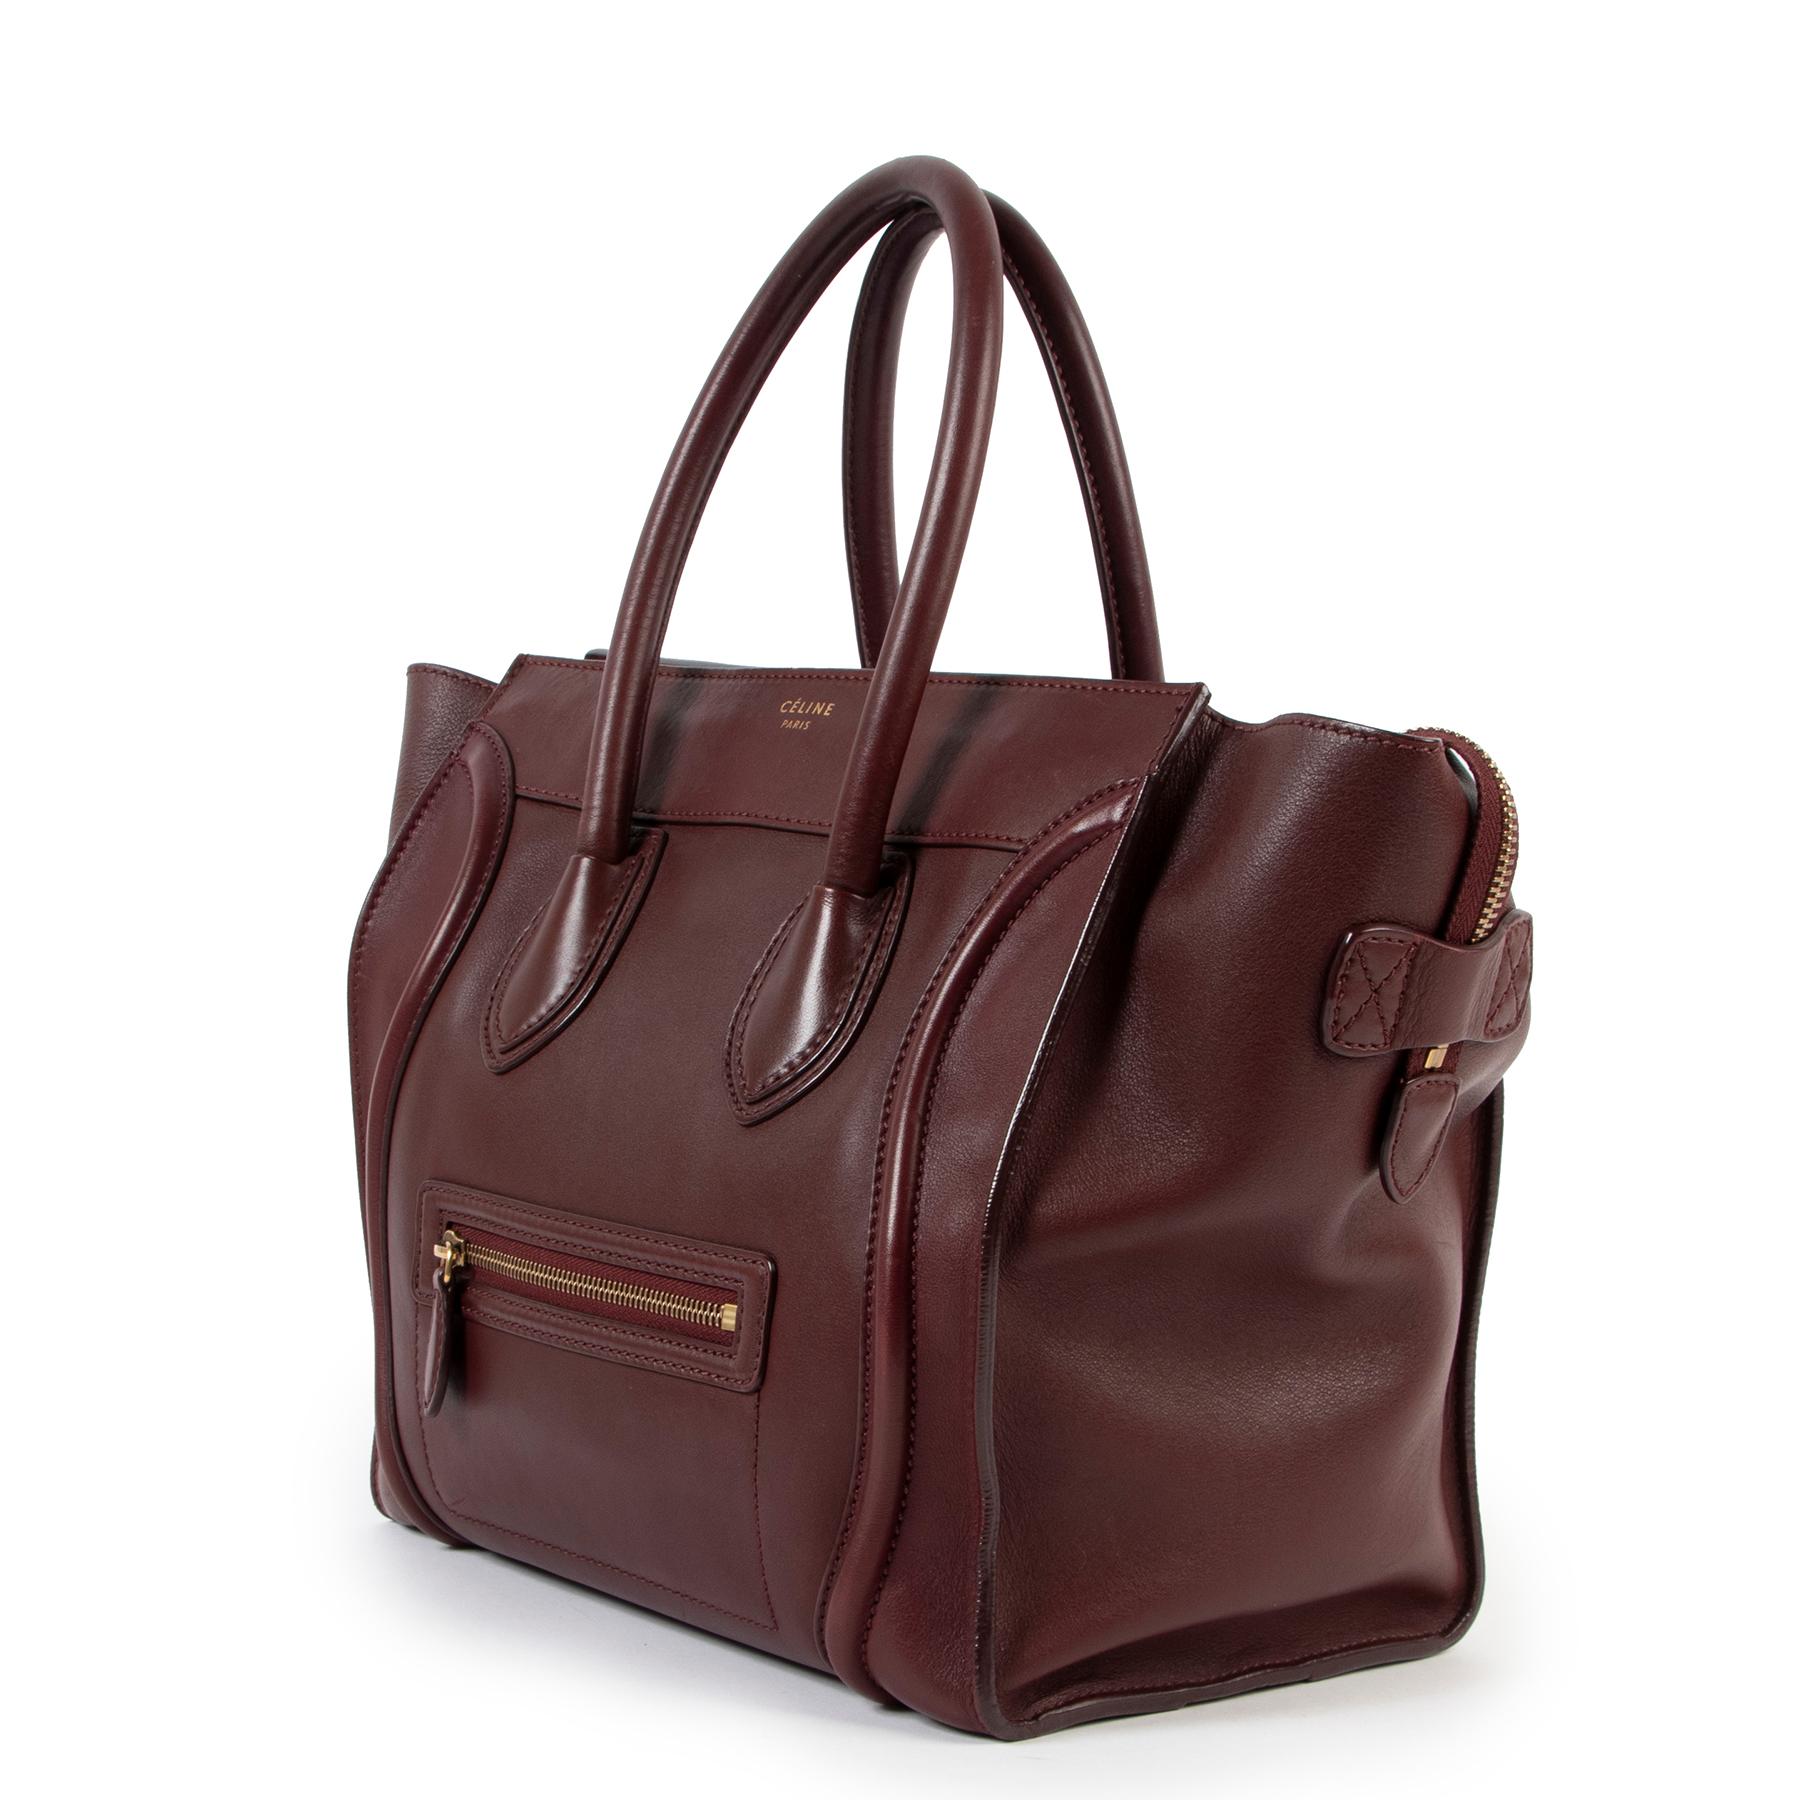 We are still obsessed with old Celine, the Luggage tote bag is one of the most sought-after It bags. Carrying a casual yet stylish vibe, it is minimalistic and distinctive with its sturdy silhouette and detailed stitching. Finished in burgundy